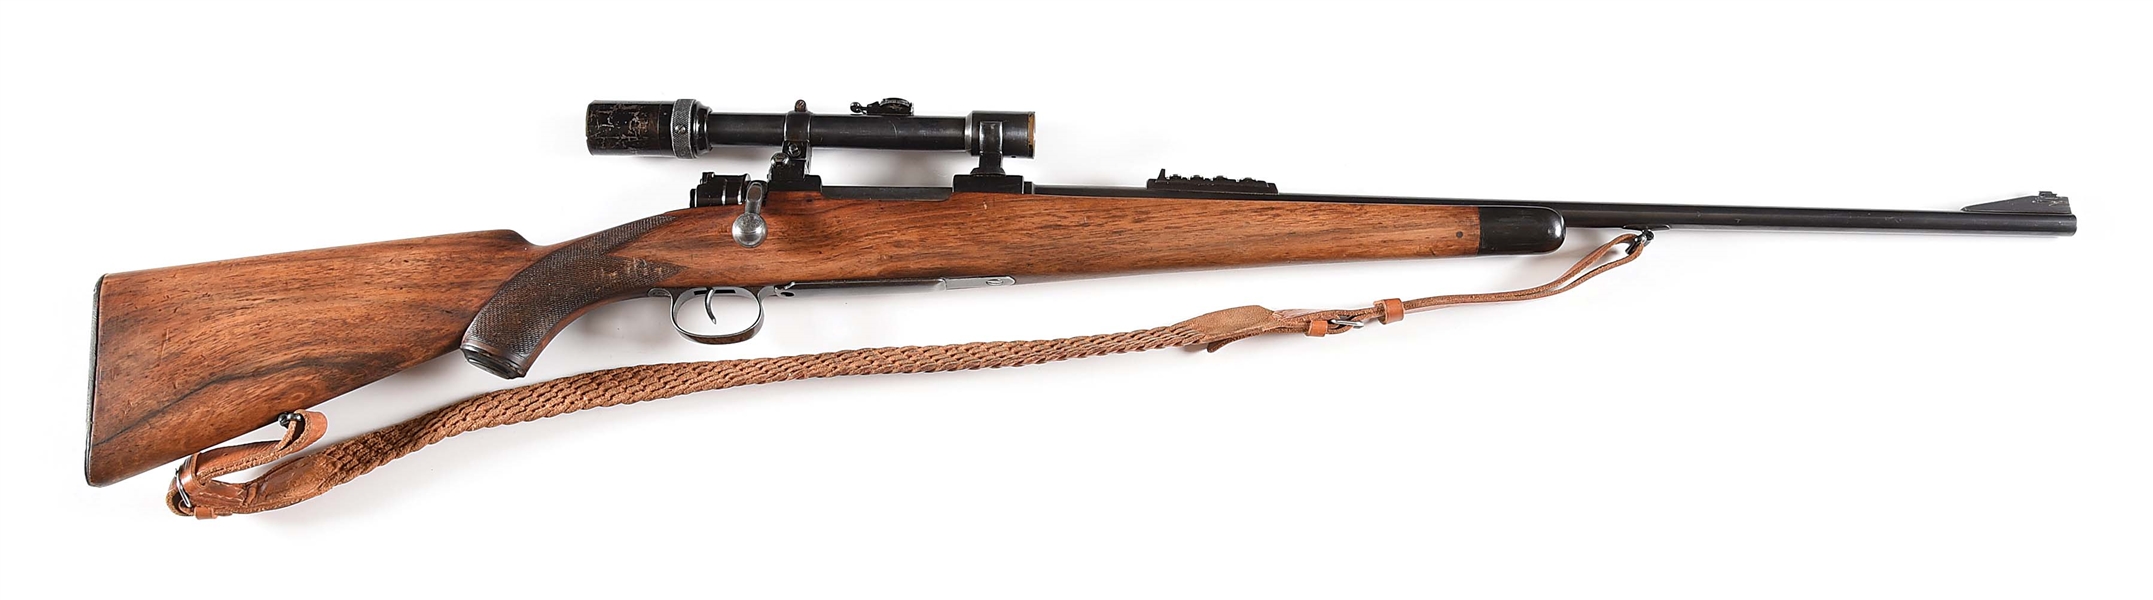 (C) ENGLISH STYLE MAUSER 98 SPORTER BOLT ACTION RIFLE.